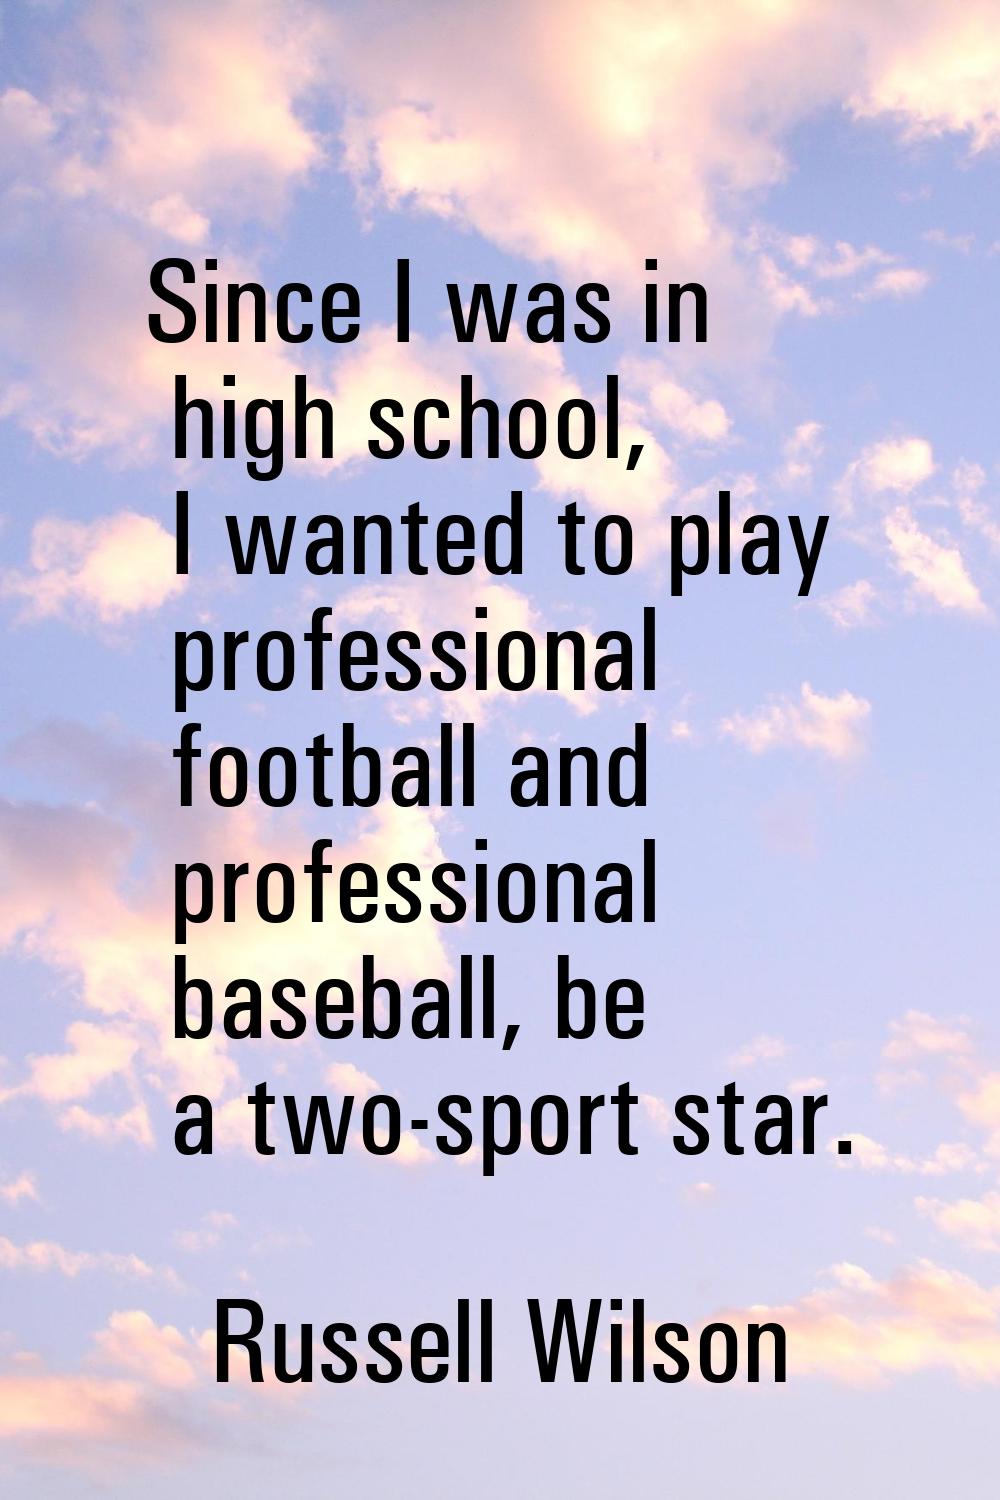 Since I was in high school, I wanted to play professional football and professional baseball, be a 